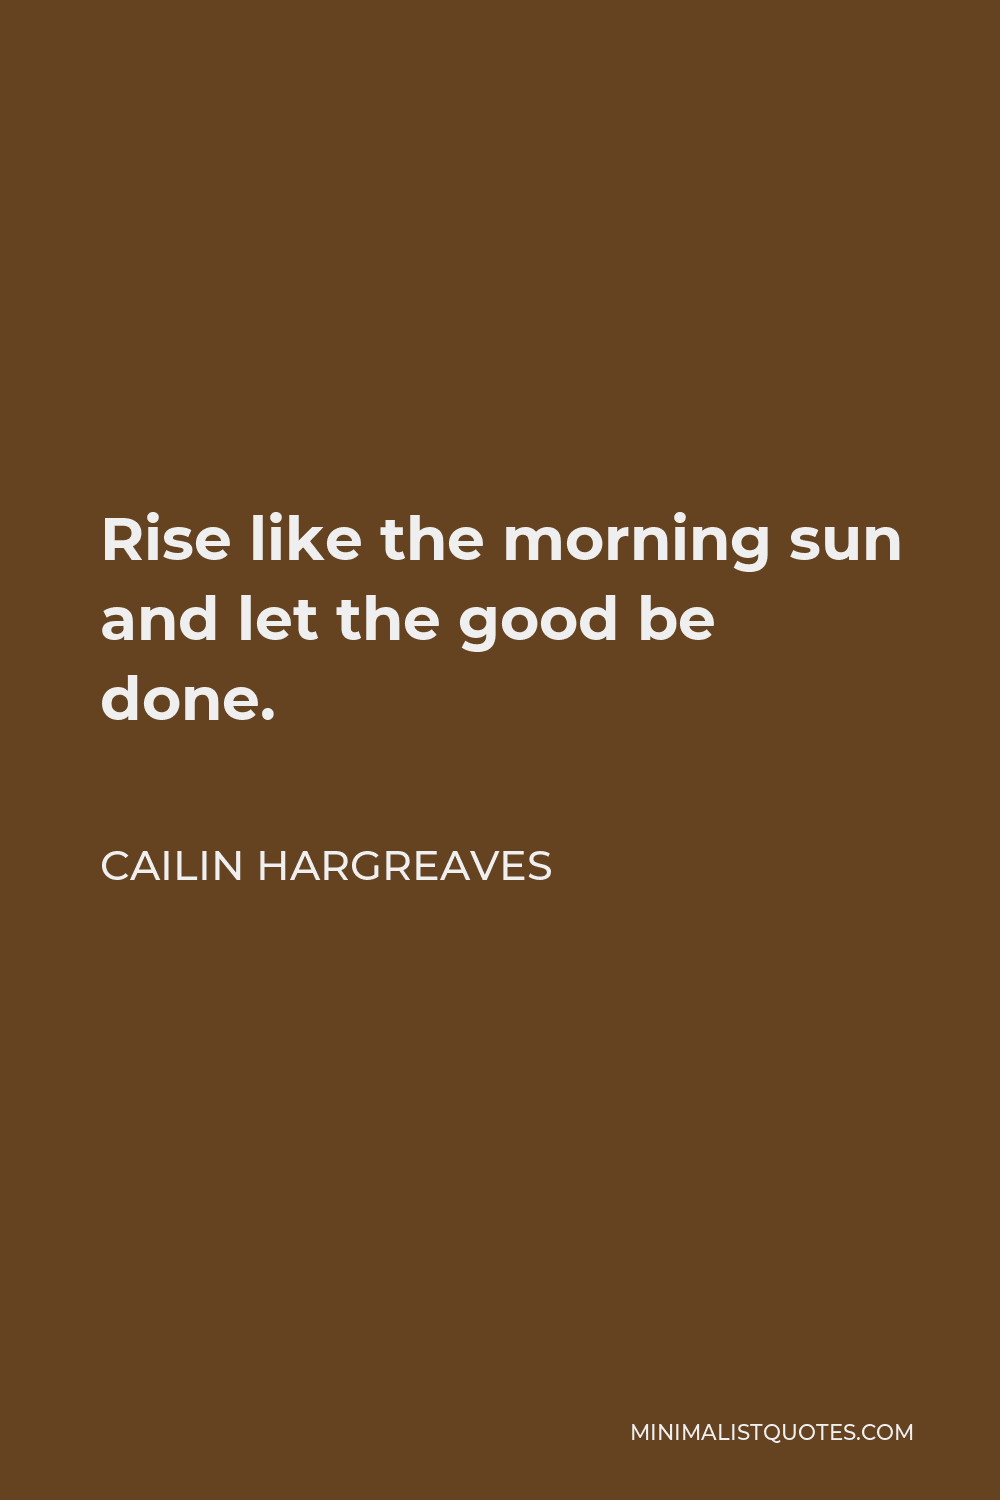 Cailin Hargreaves Quote - Rise like the morning sun and let the good be done.